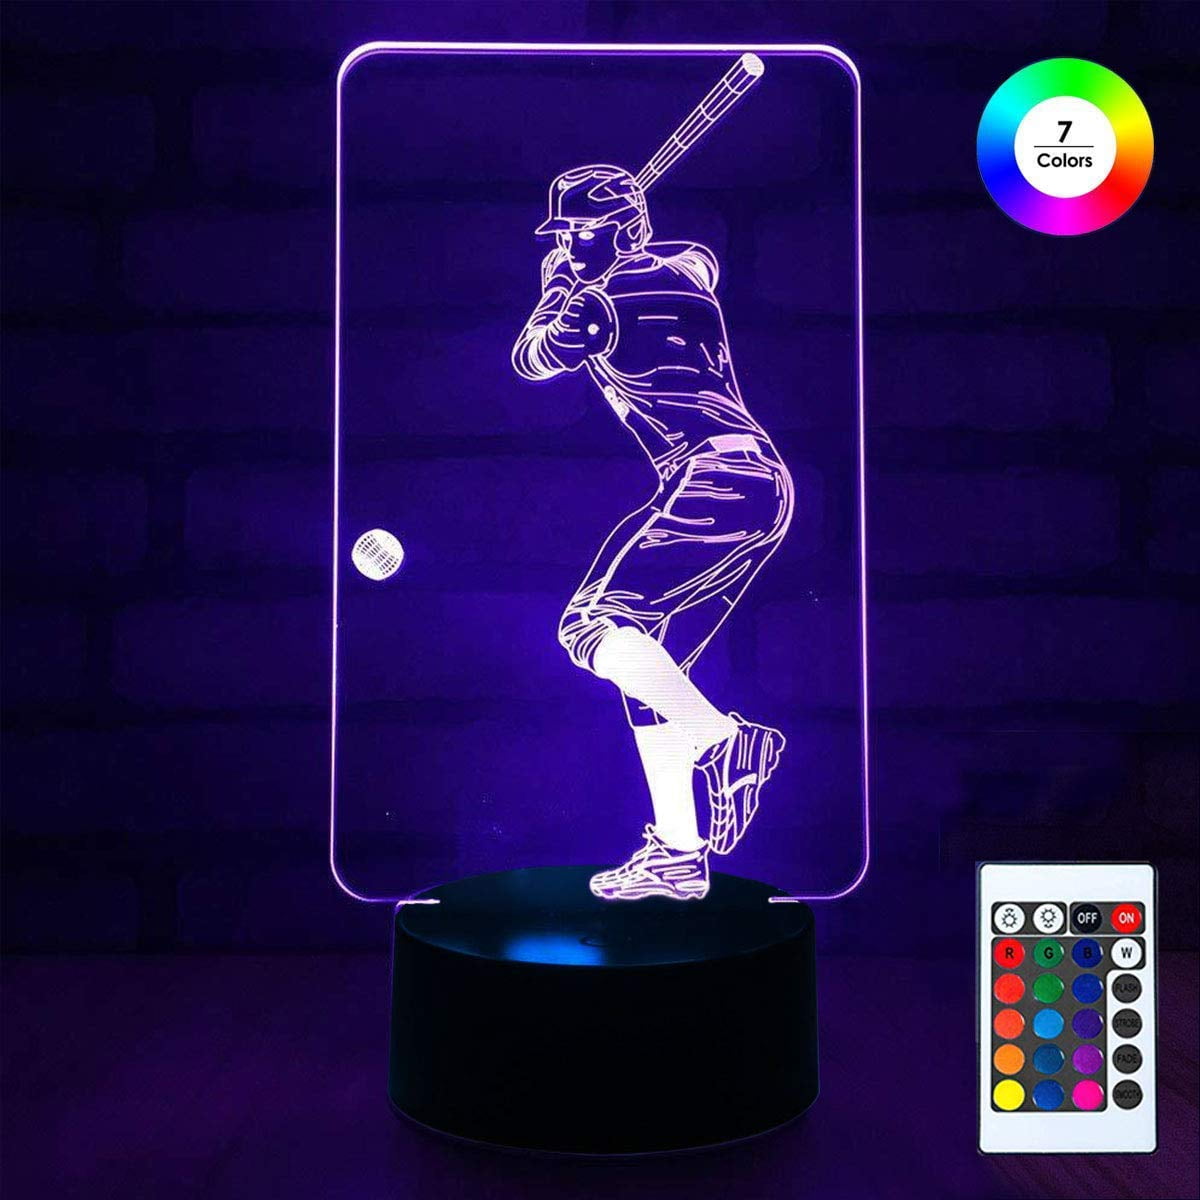 Best Gifts 3D LED Night Light 7 Color Change Decor Lamp with Remote Control for Kids